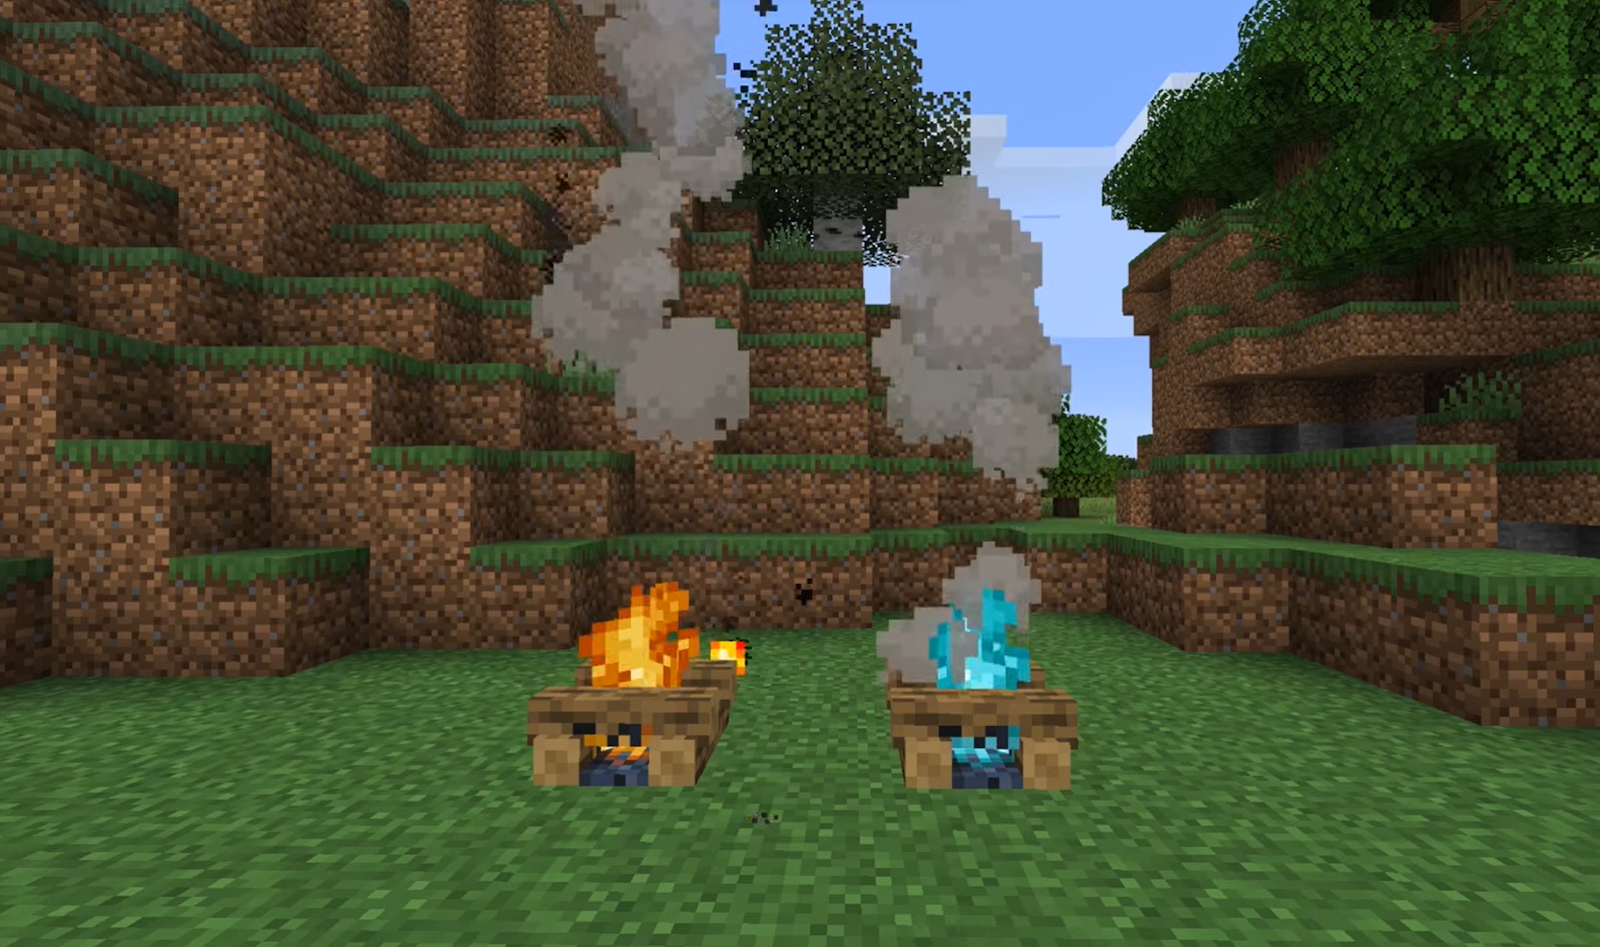 two campfires with blue and yellow fire on the green land